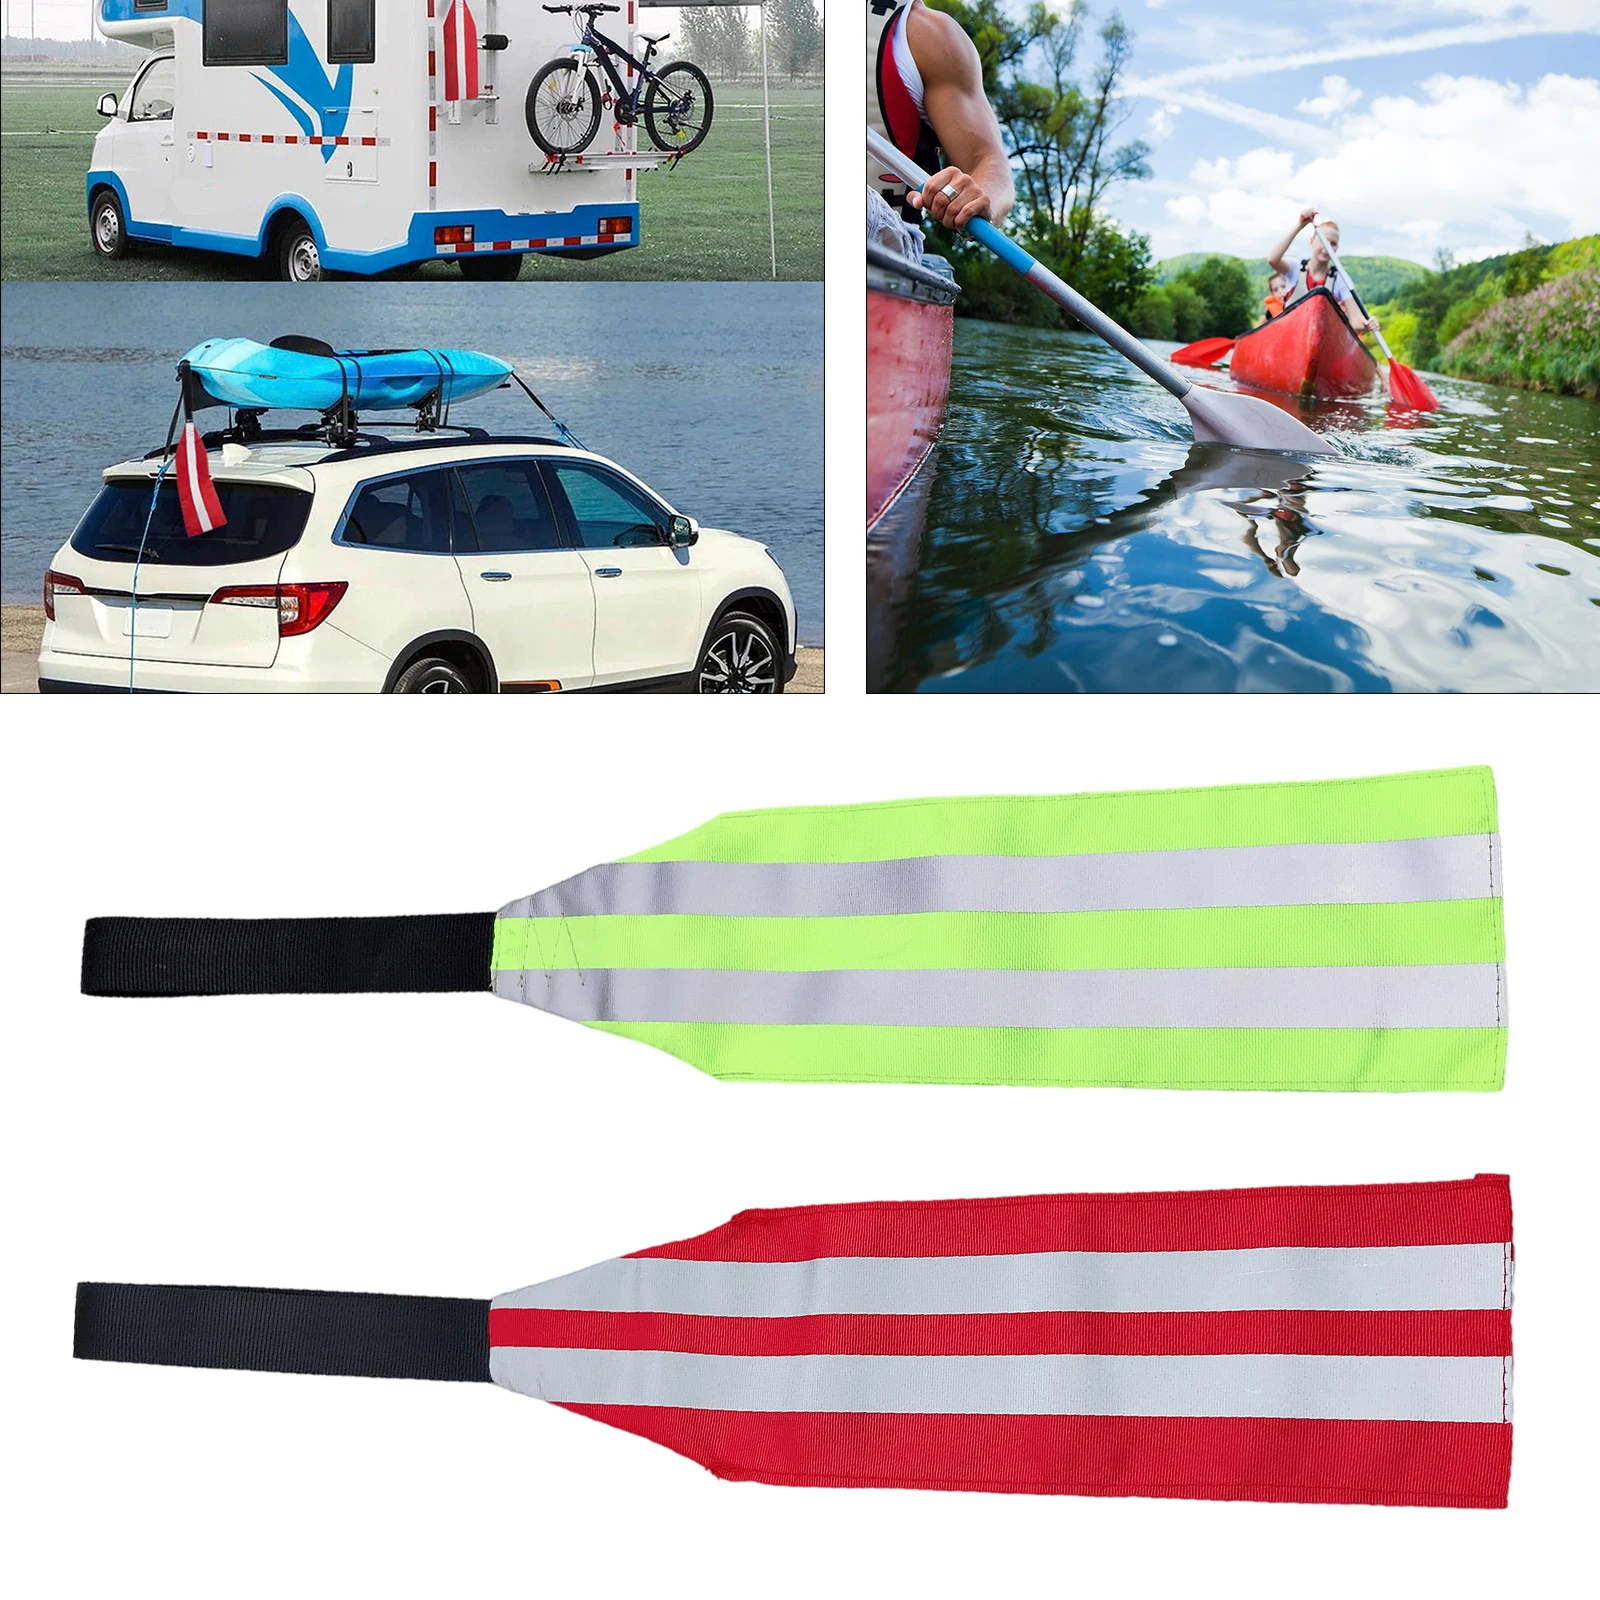 35x13cm Kayak Tow Safety Flag Towing Trailer Warning Flags Travel Caution